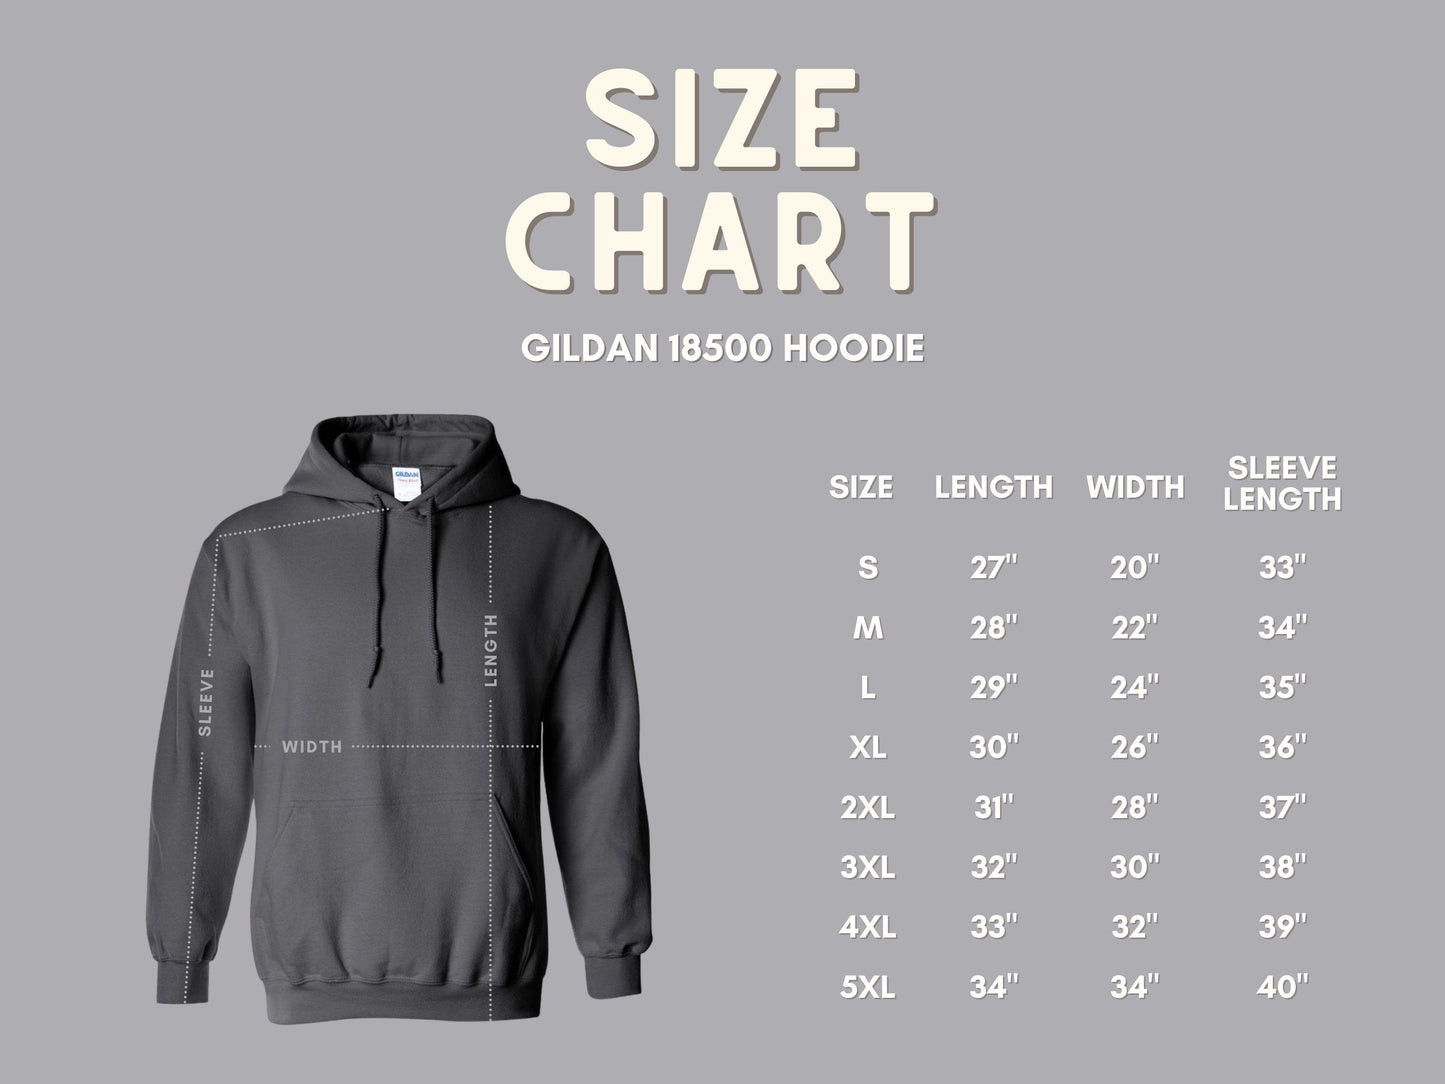 MORE CAMPING FRONT & SLEEVE DESIGN HOODIE